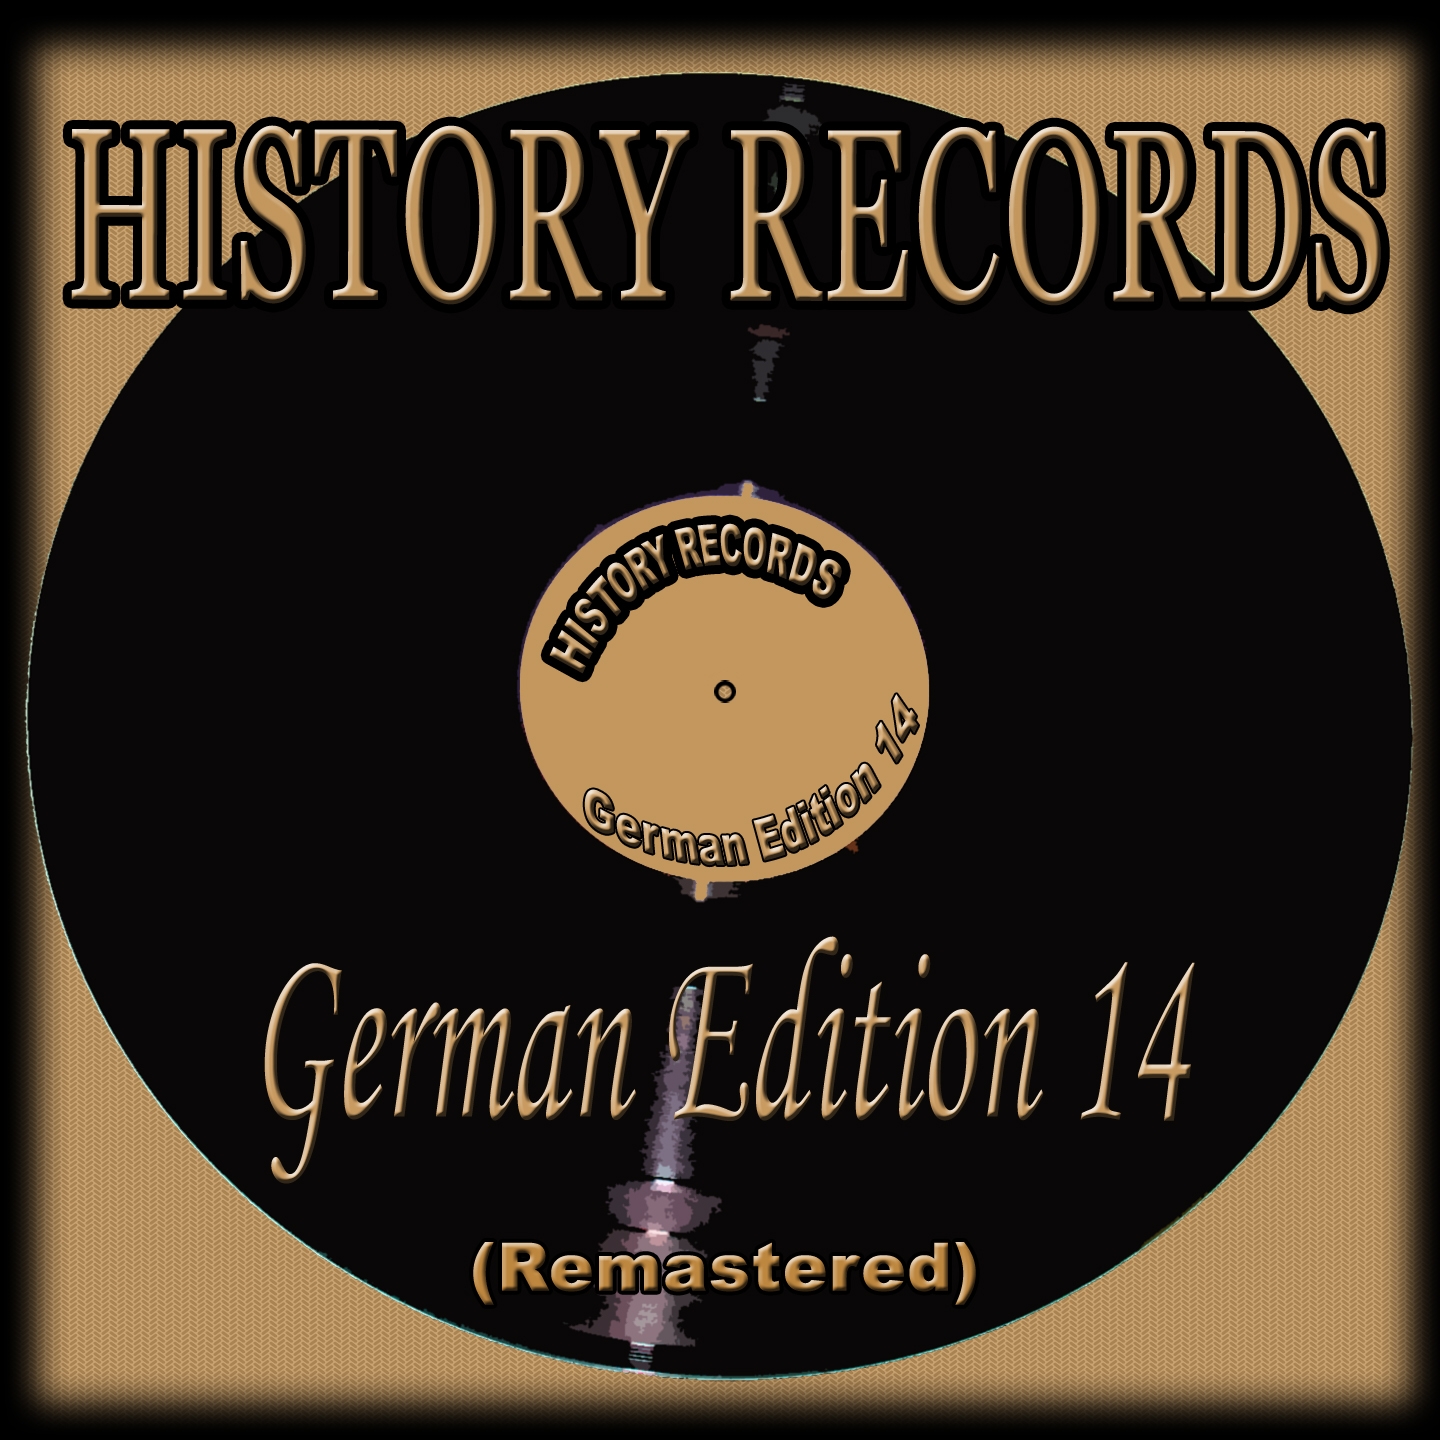 History Records - German Edition 14 (Remastered)